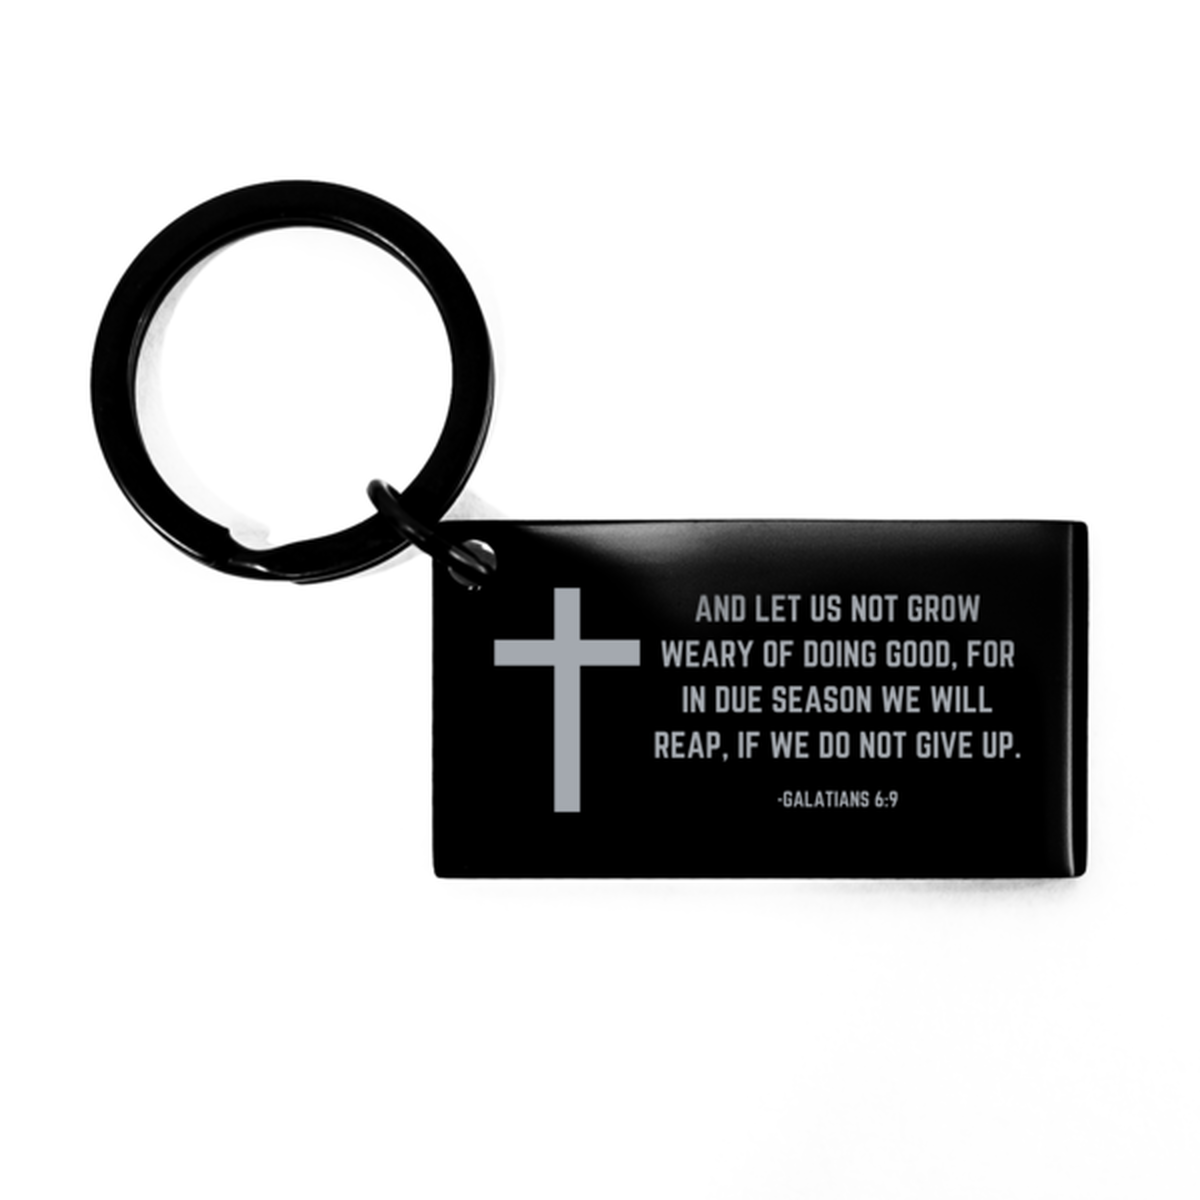 Baptism Gifts For Teenage Boys Girls, Christian Bible Verse Black Keychain, And let us not grow weary, Confirmation Gifts, Bible Verse Keyring for Son, Godson, Grandson, Nephew